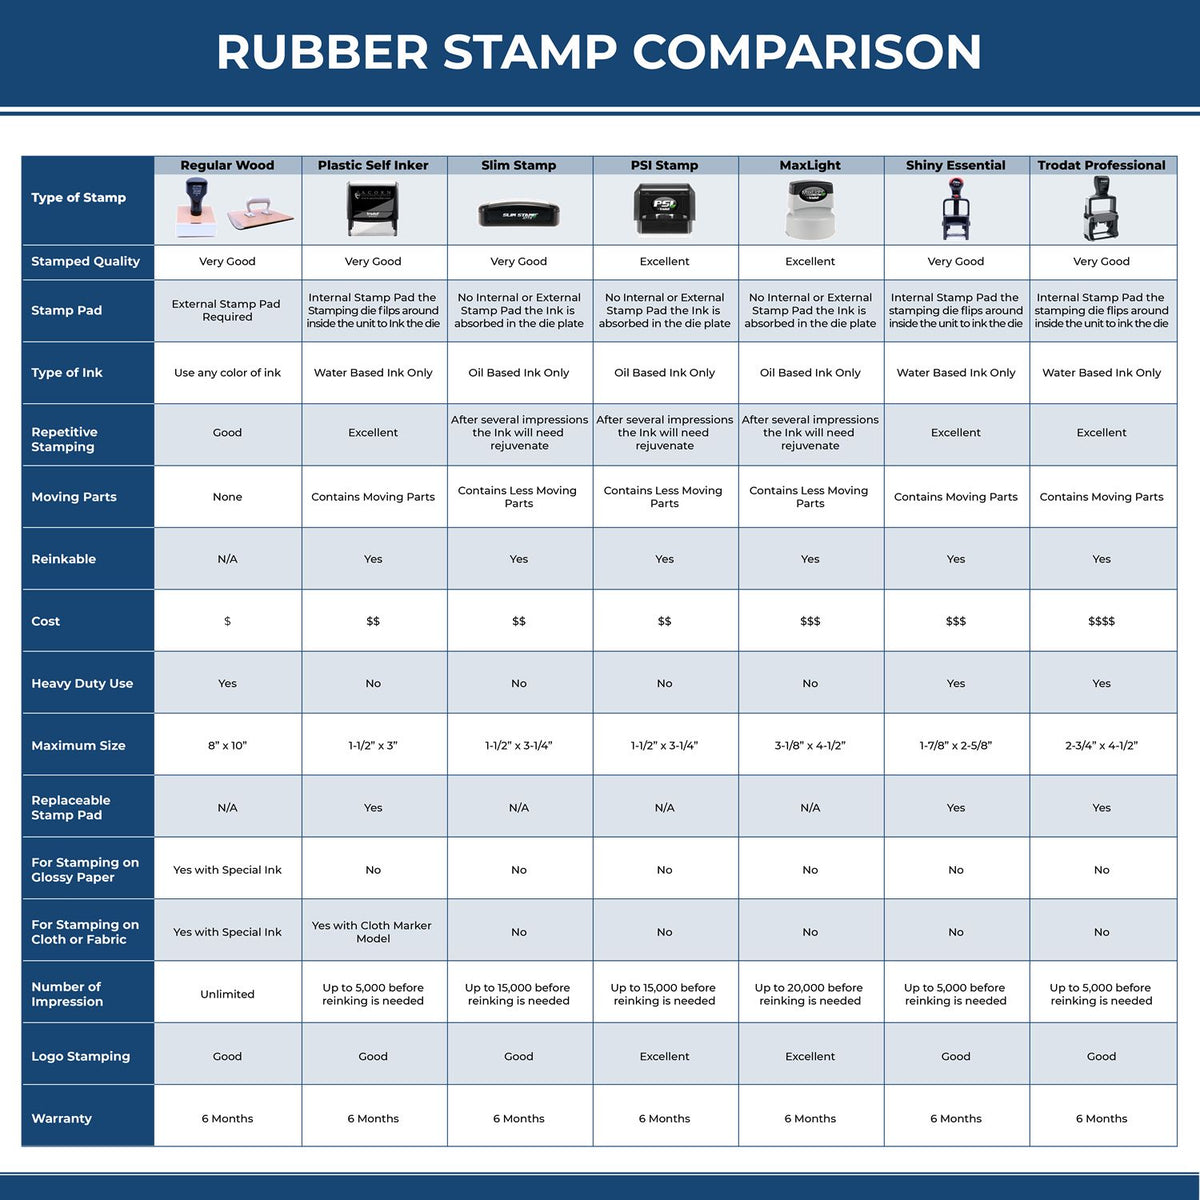 Large Package Services Rubber Stamp 4946R Rubber Stamp Comparison